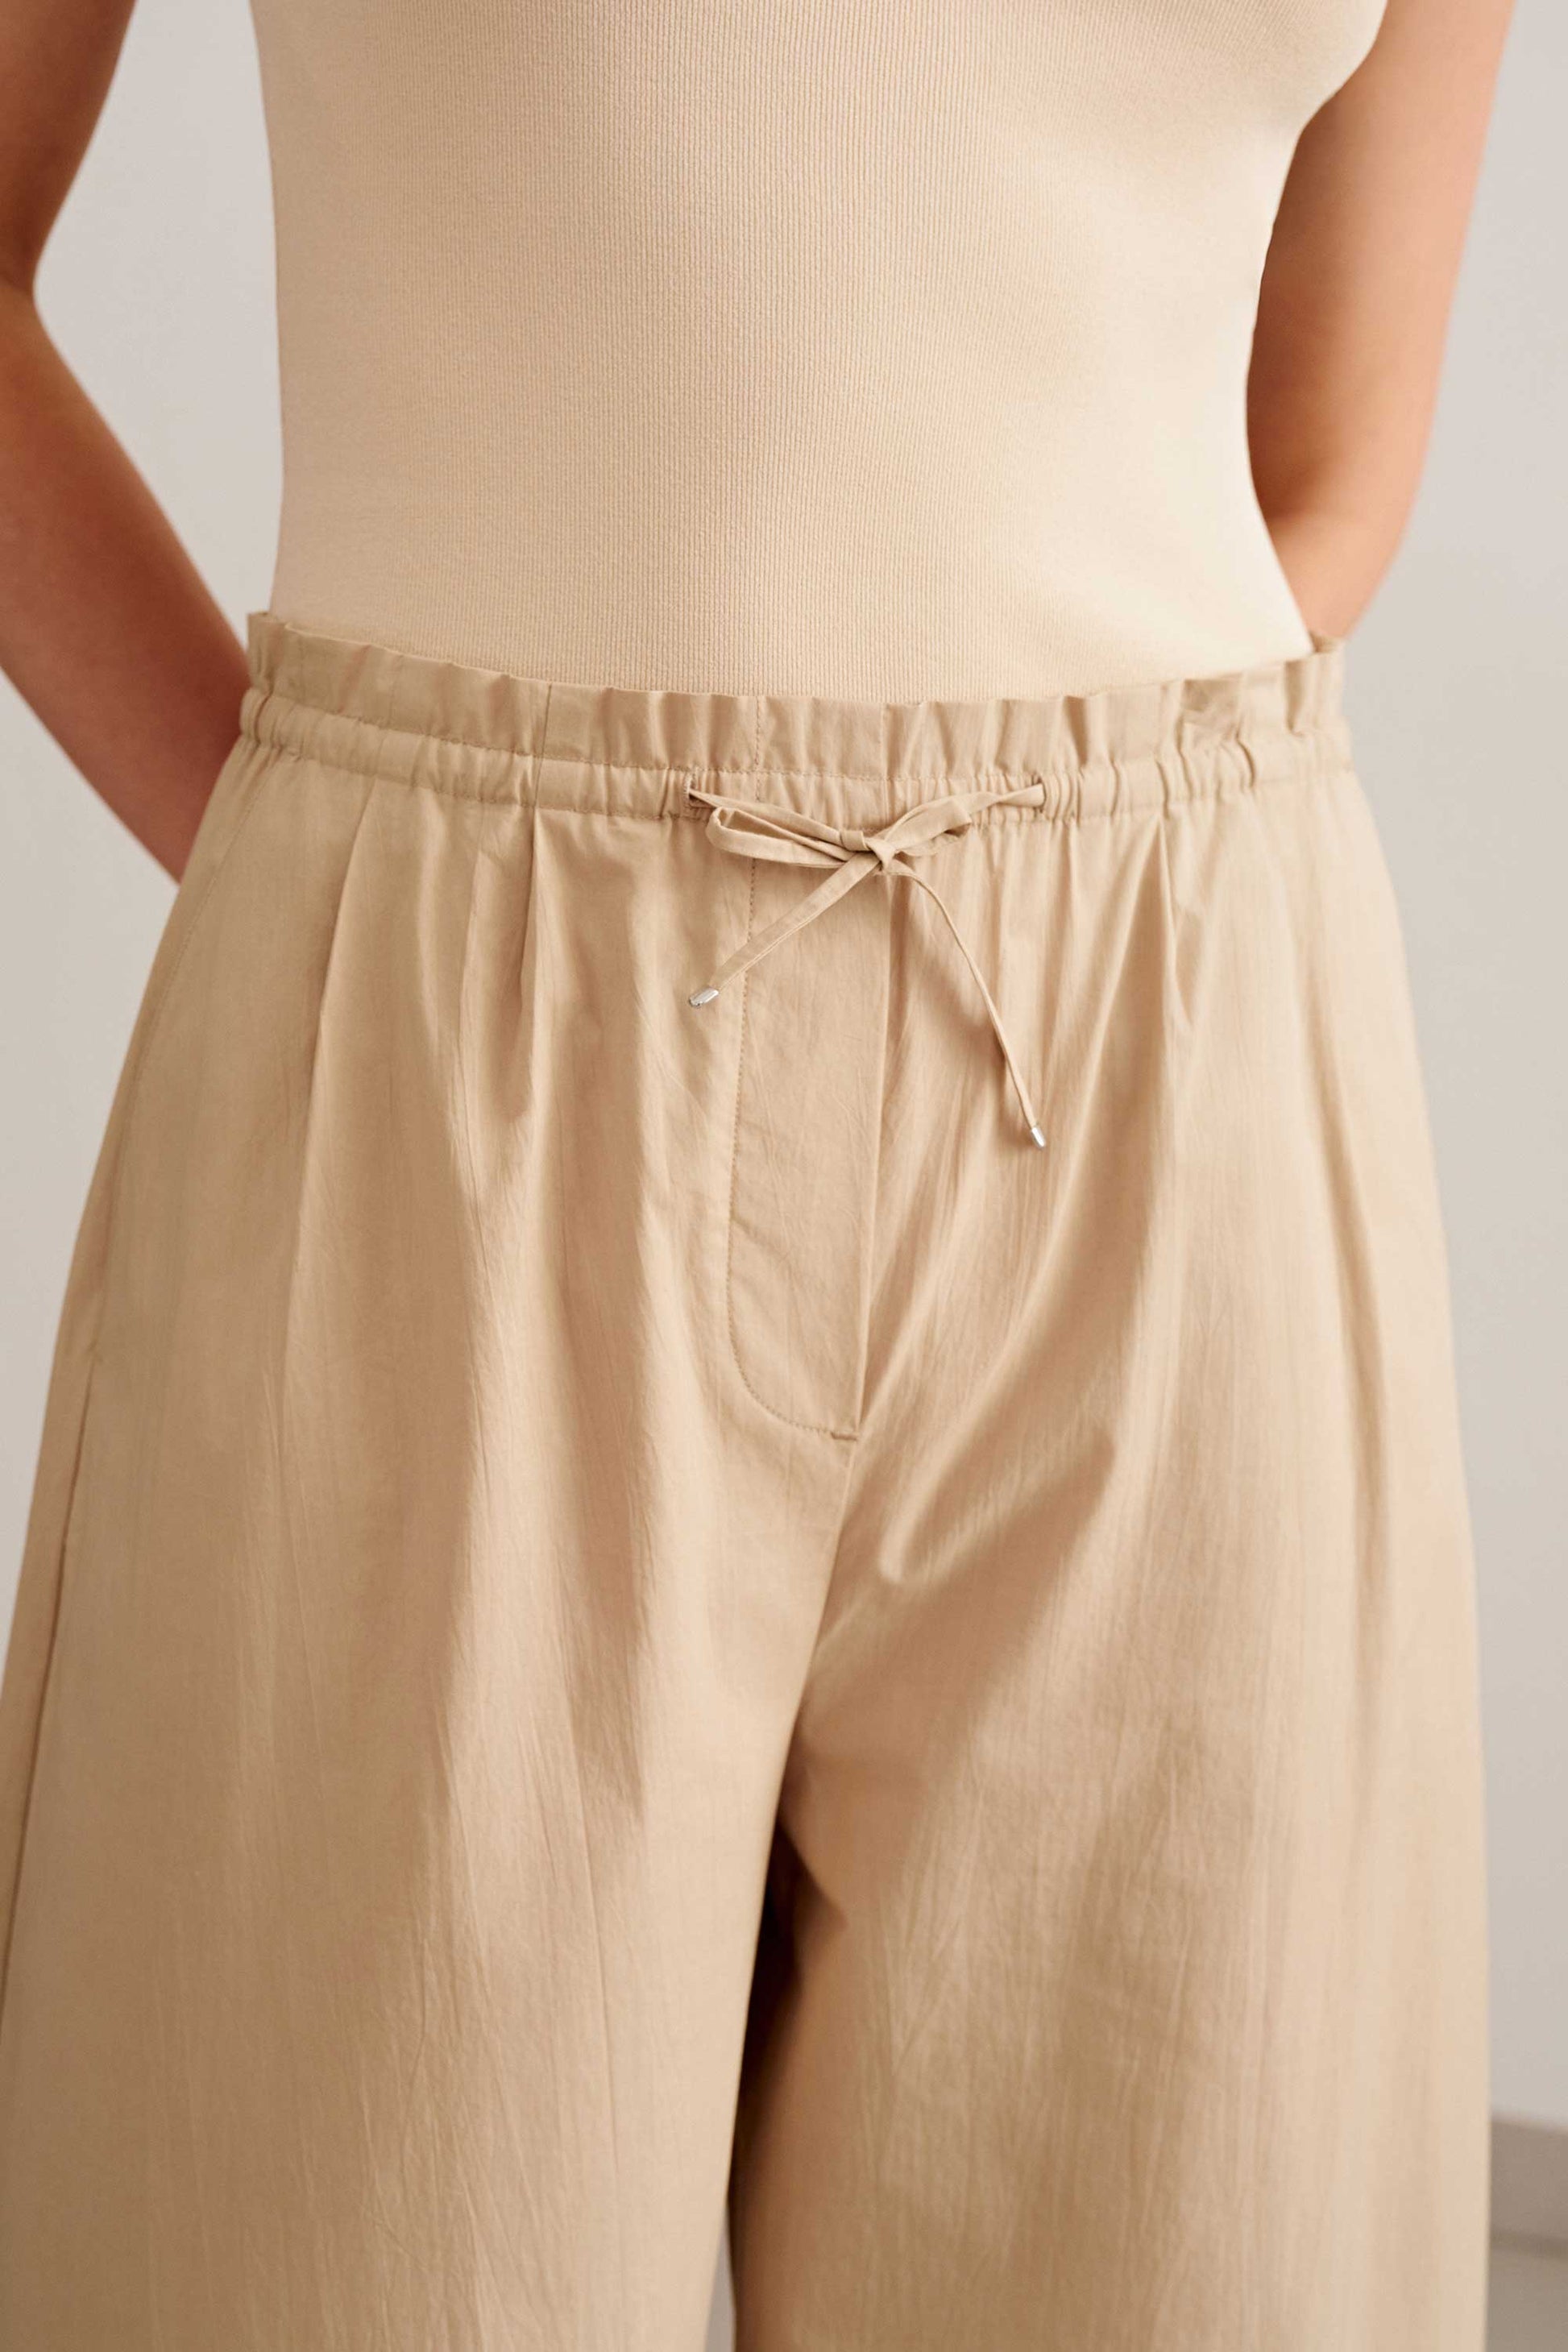 a woman wearing a top that tucked in light brown pants. the pants has a knot tying.  